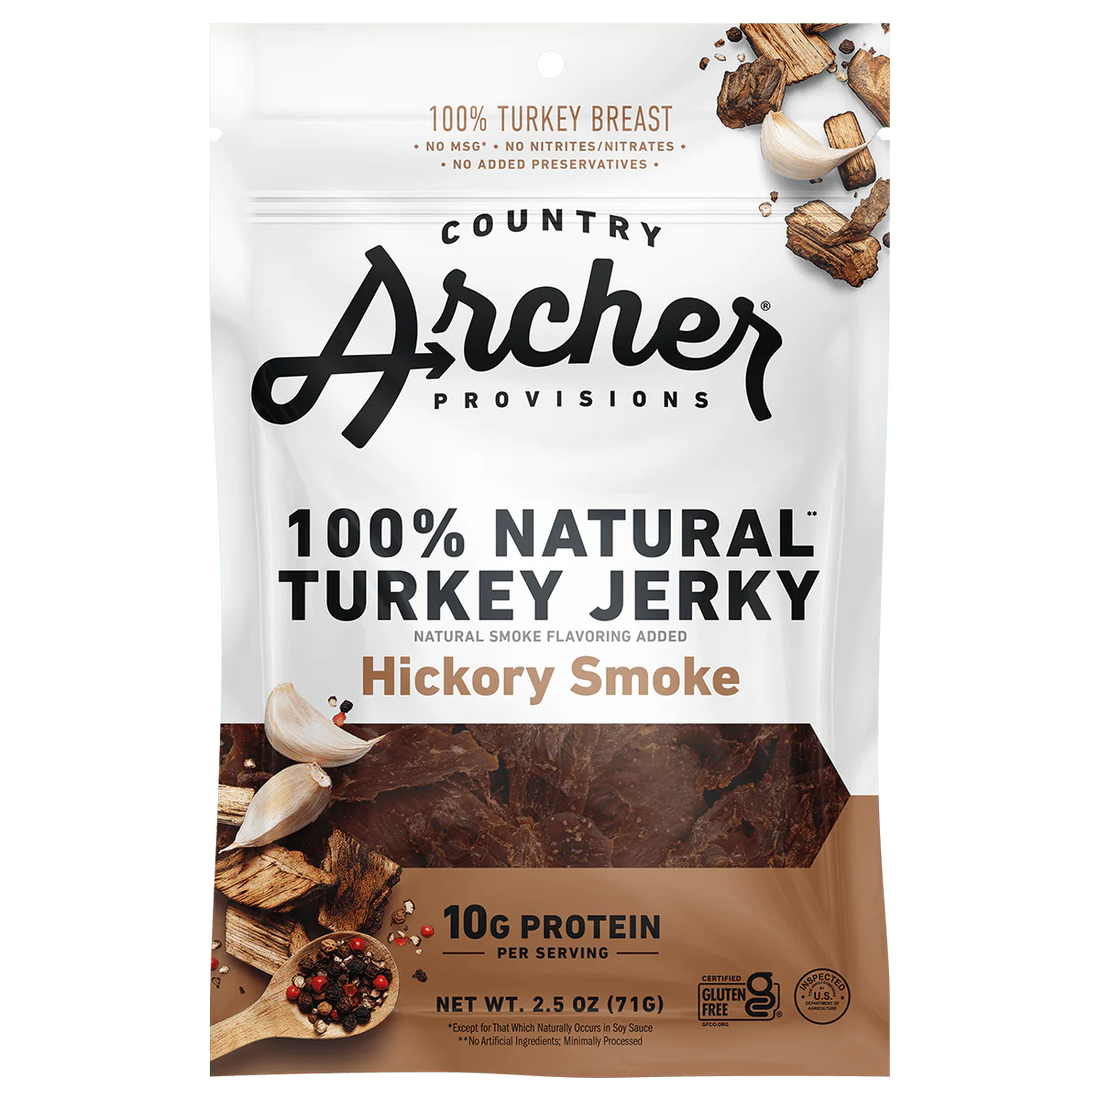 Delicious Turkey Jerky for Beef Jerky Enthusiasts